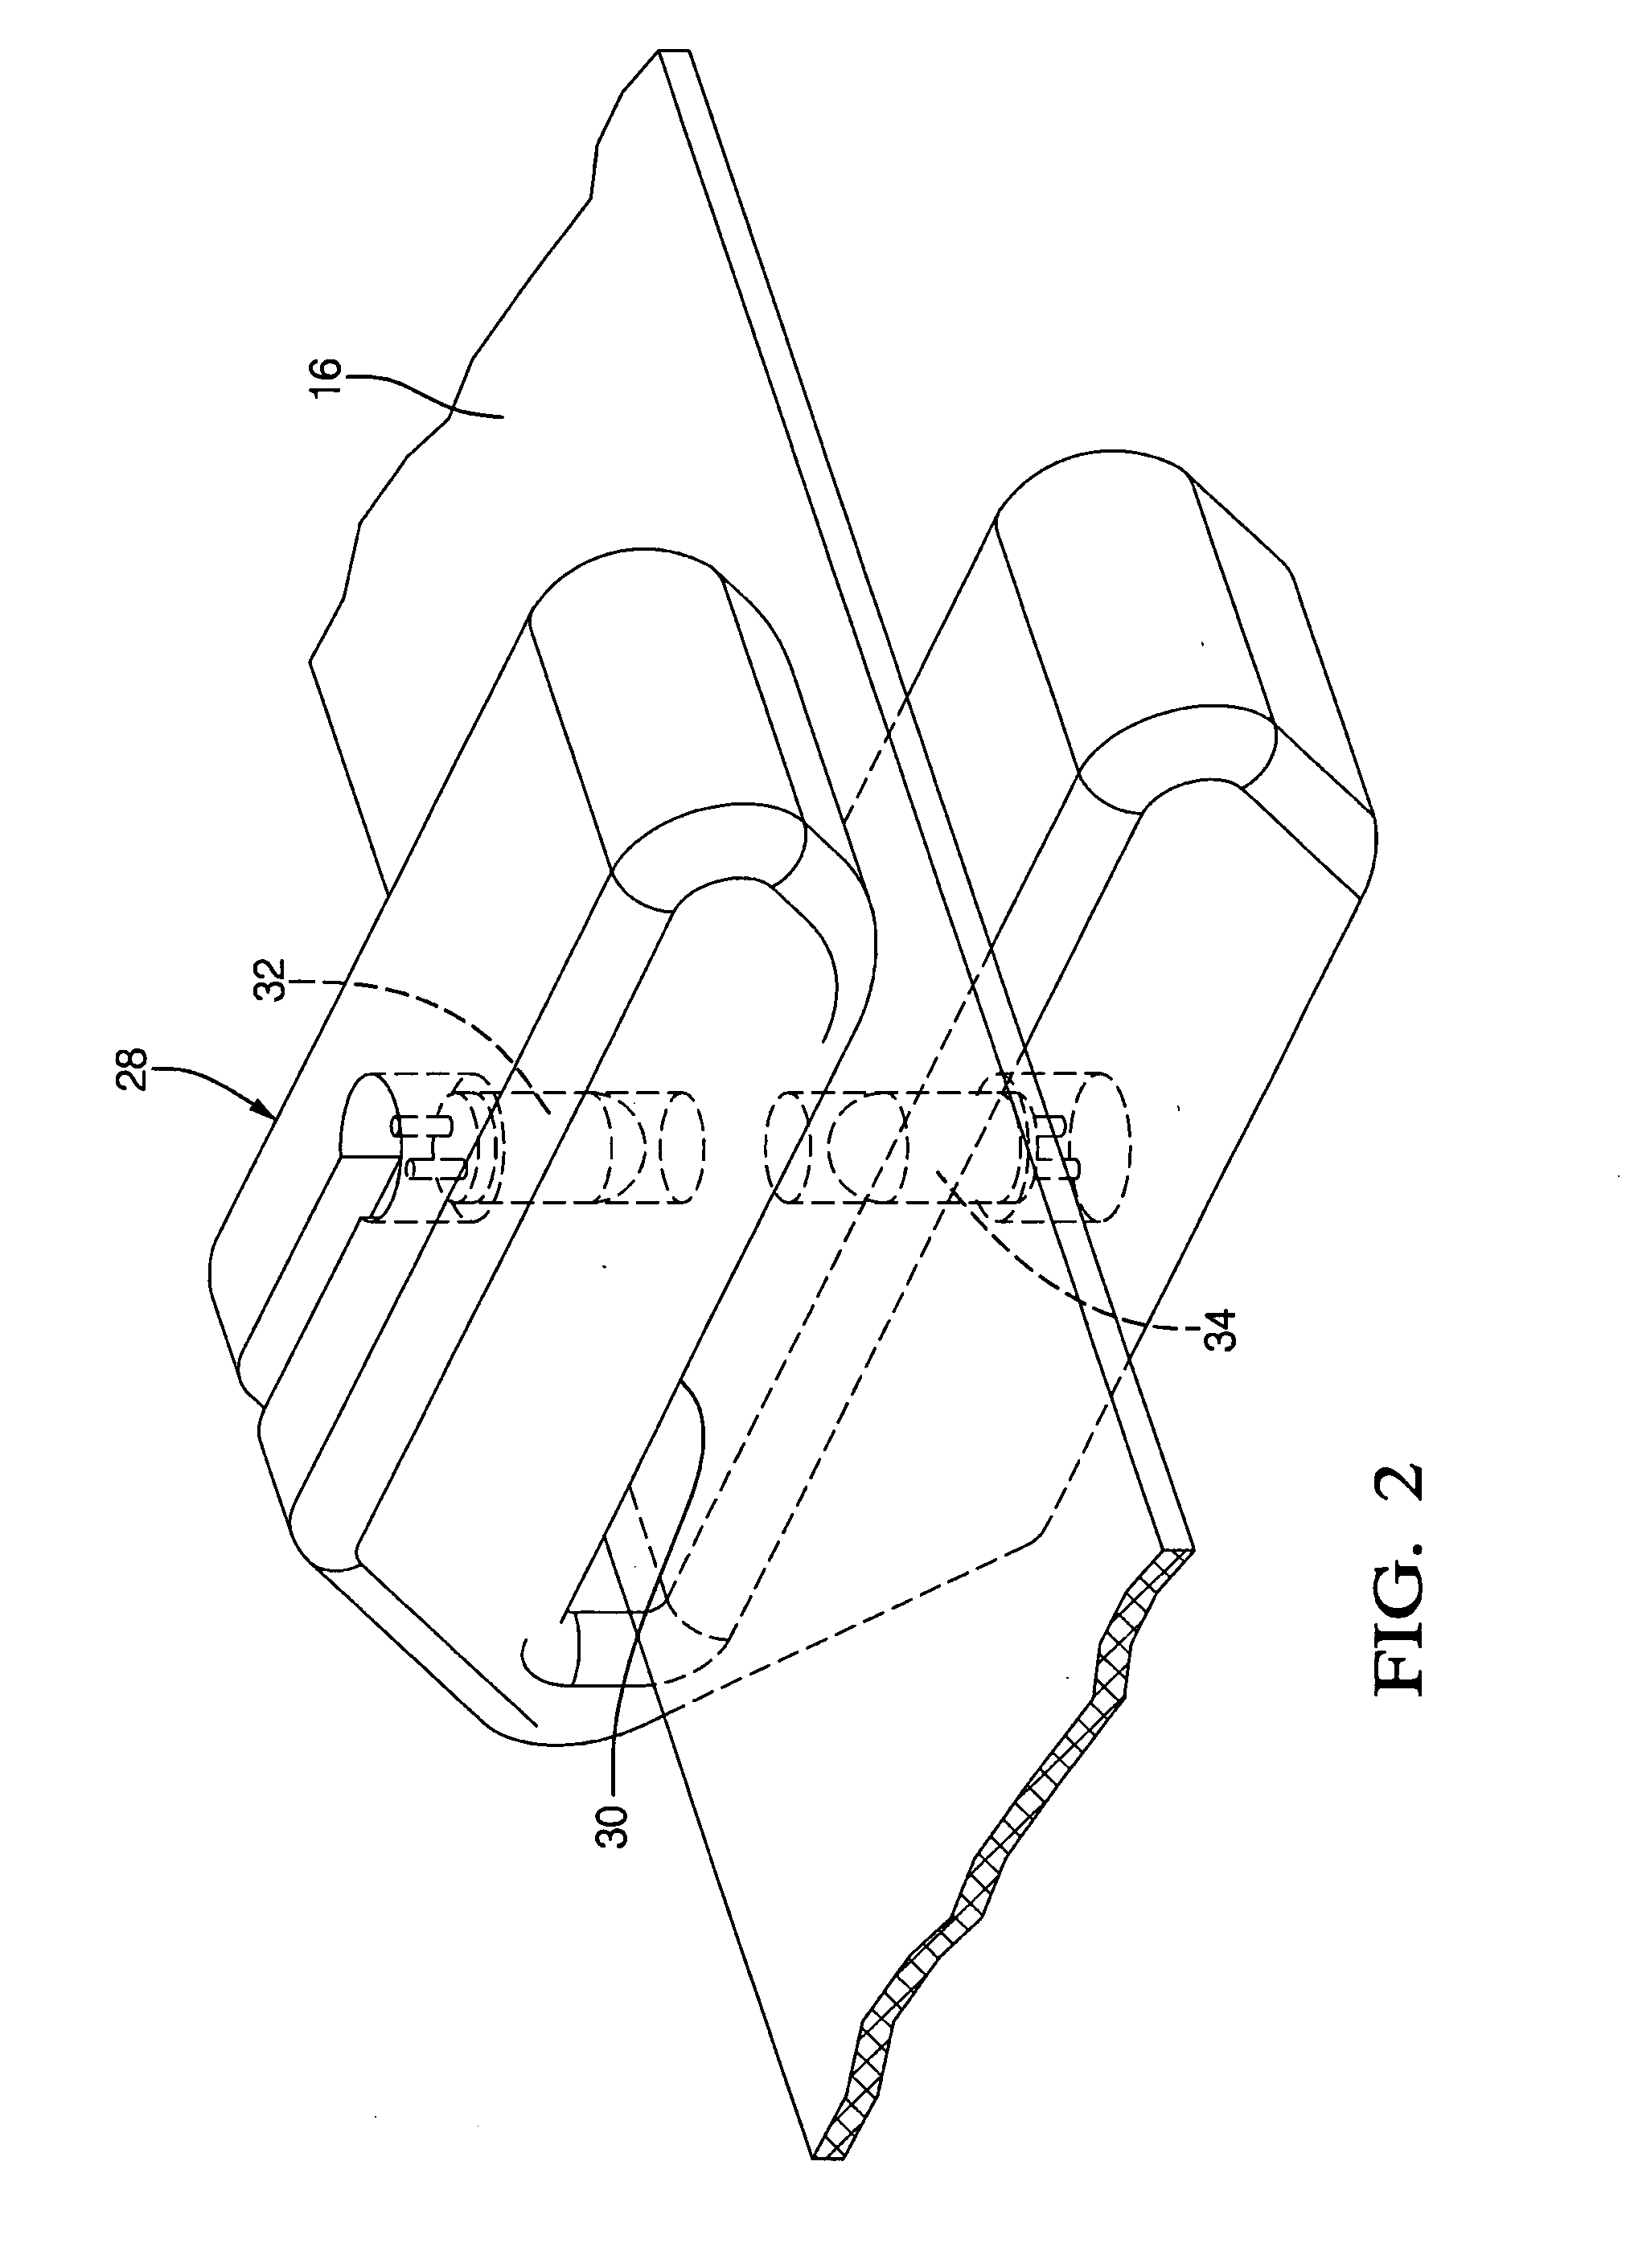 Child restraint system with in-motion belt status monitoring